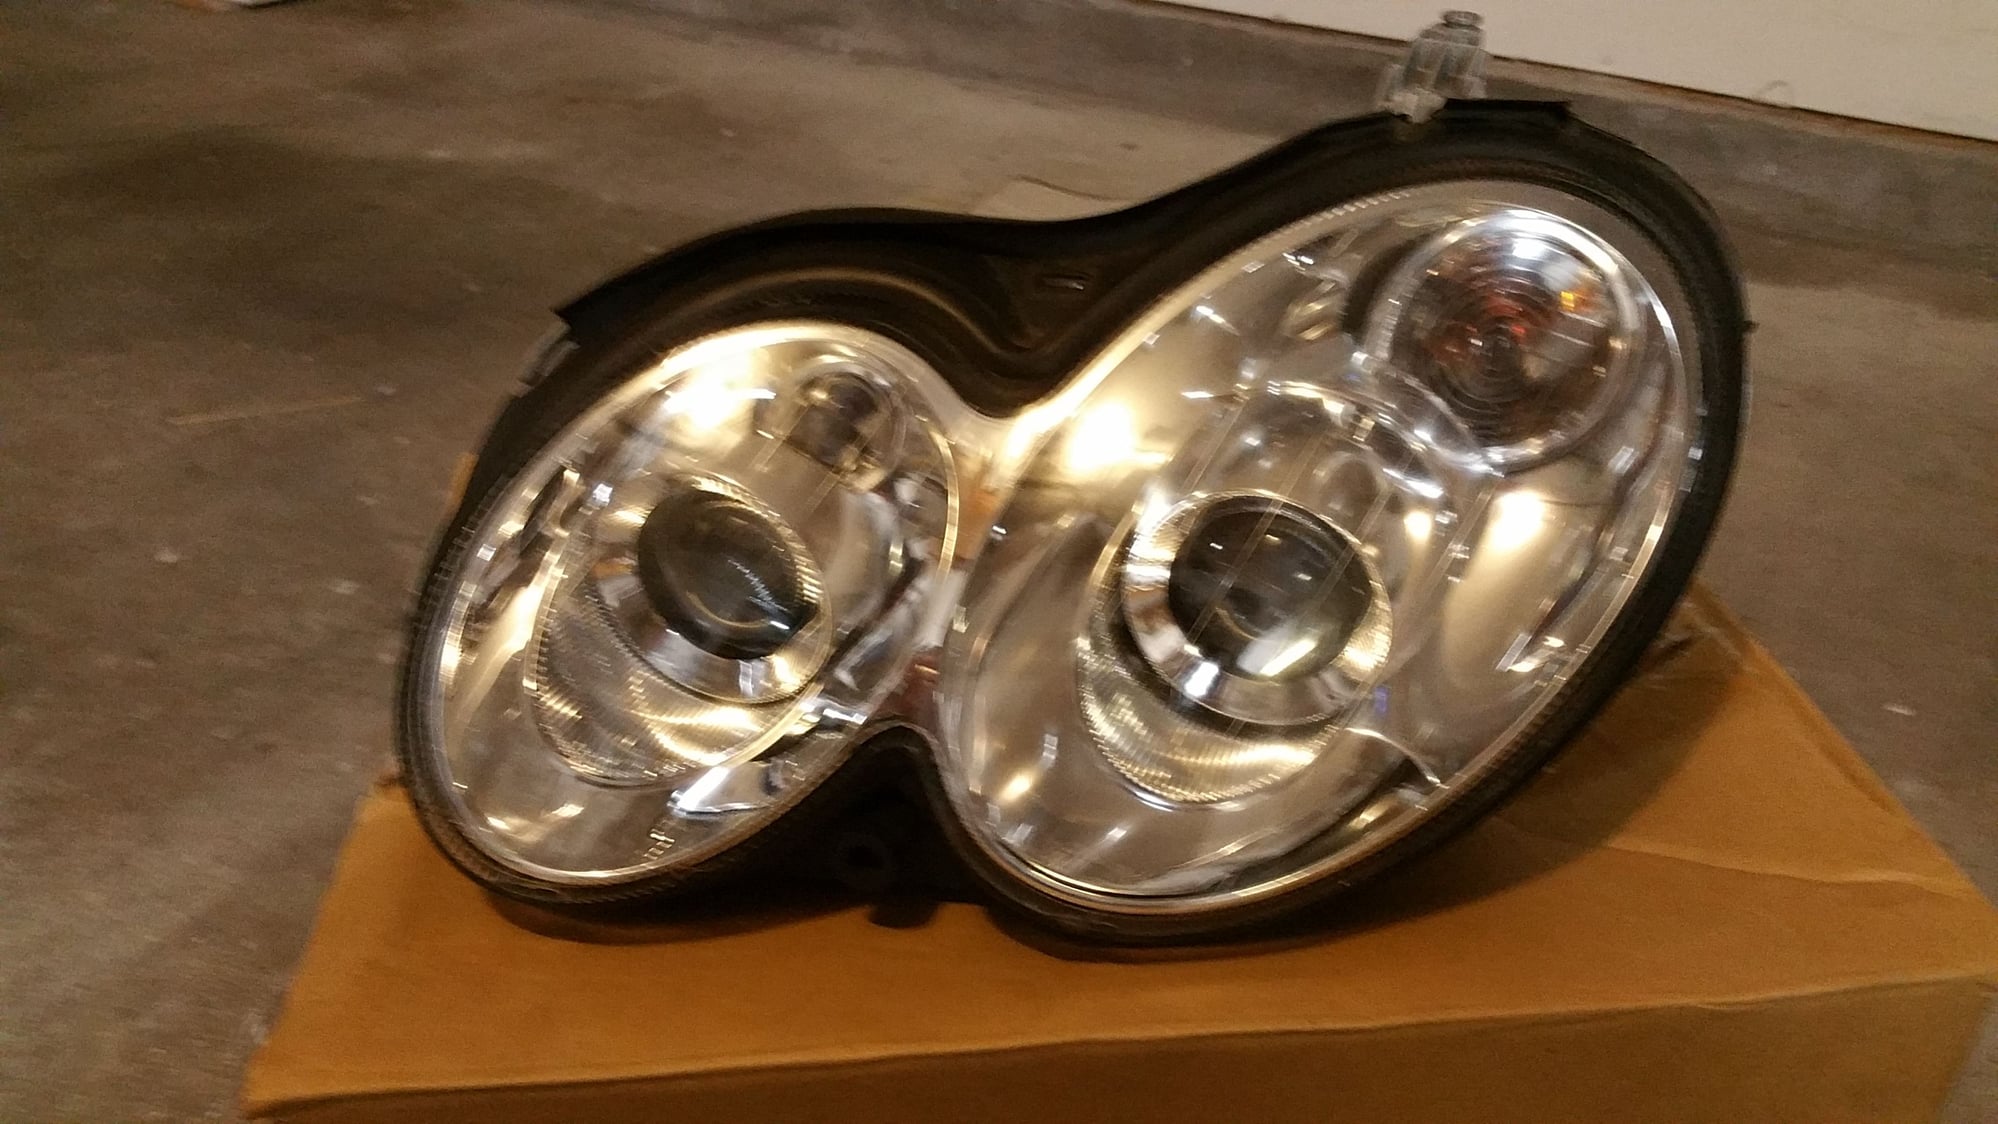 Lights - Quad Projector Headlights for W209 CLK, Xenon/HID Low Beams - Used - 2003 to 2009 Mercedes-Benz CLK320 - 2006 to 2009 Mercedes-Benz CLK350 - 2003 to 2006 Mercedes-Benz CLK500 - 2007 to 2009 Mercedes-Benz CLK550 - Birmingham, AL 35205, United States